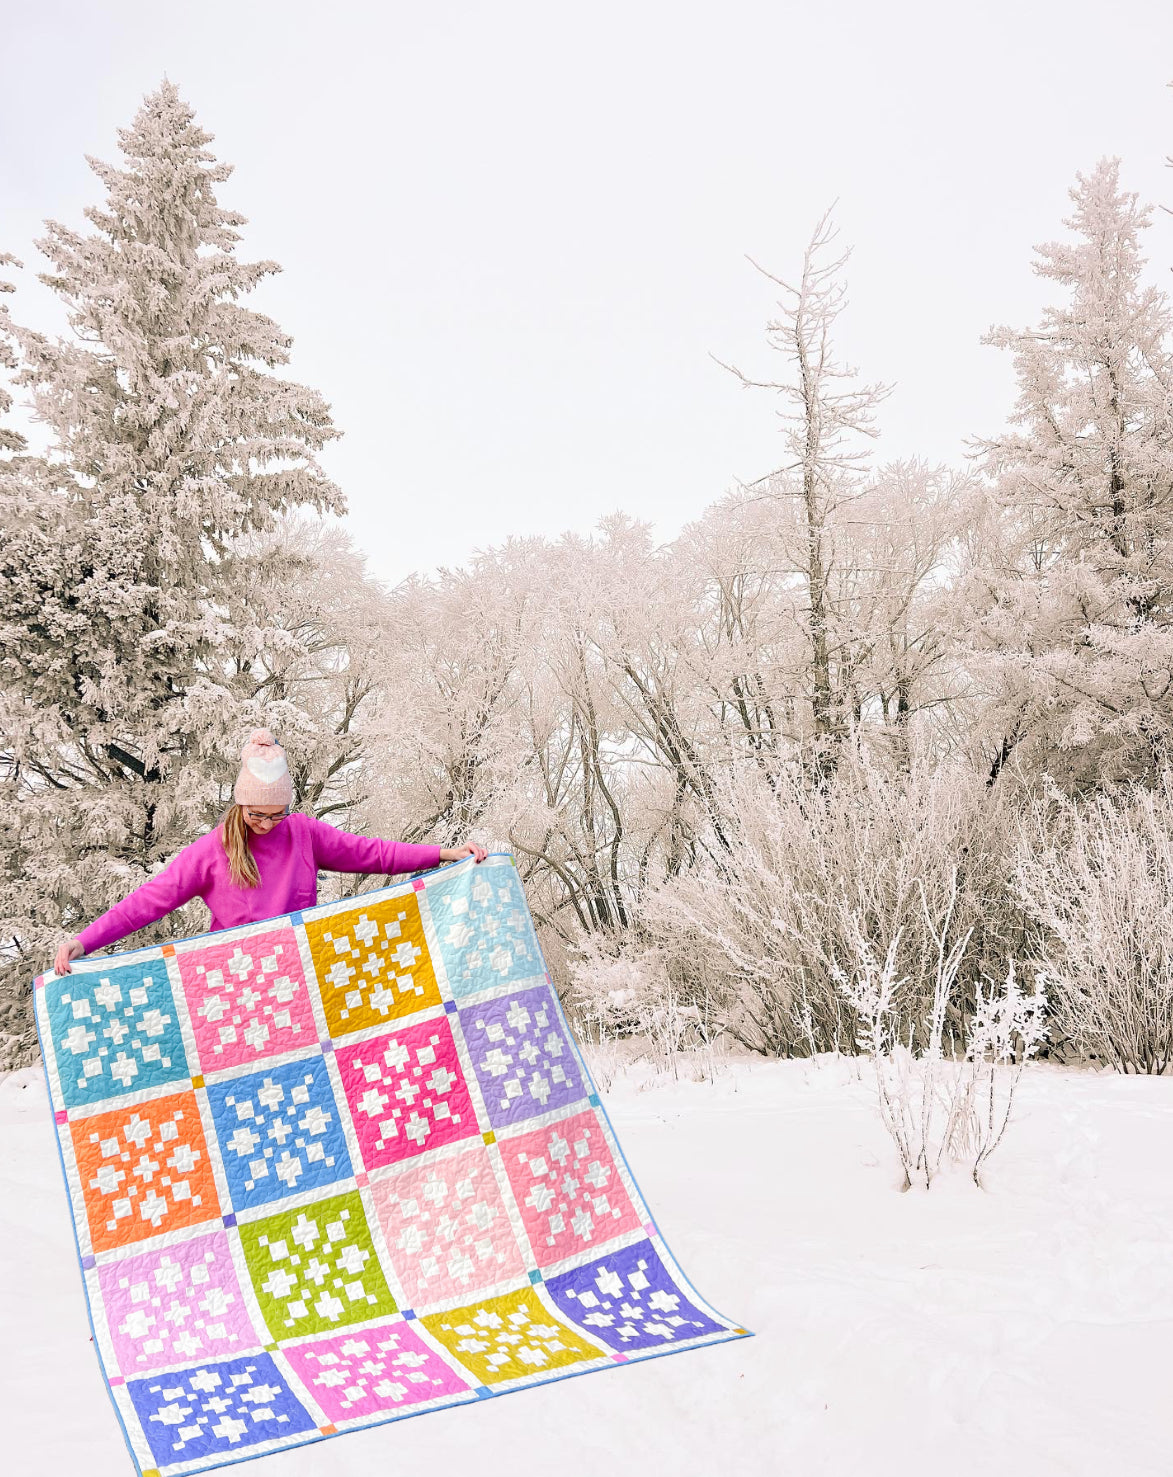 Wintry Quilt Pattern - Paper Pattern - WHOLESALE